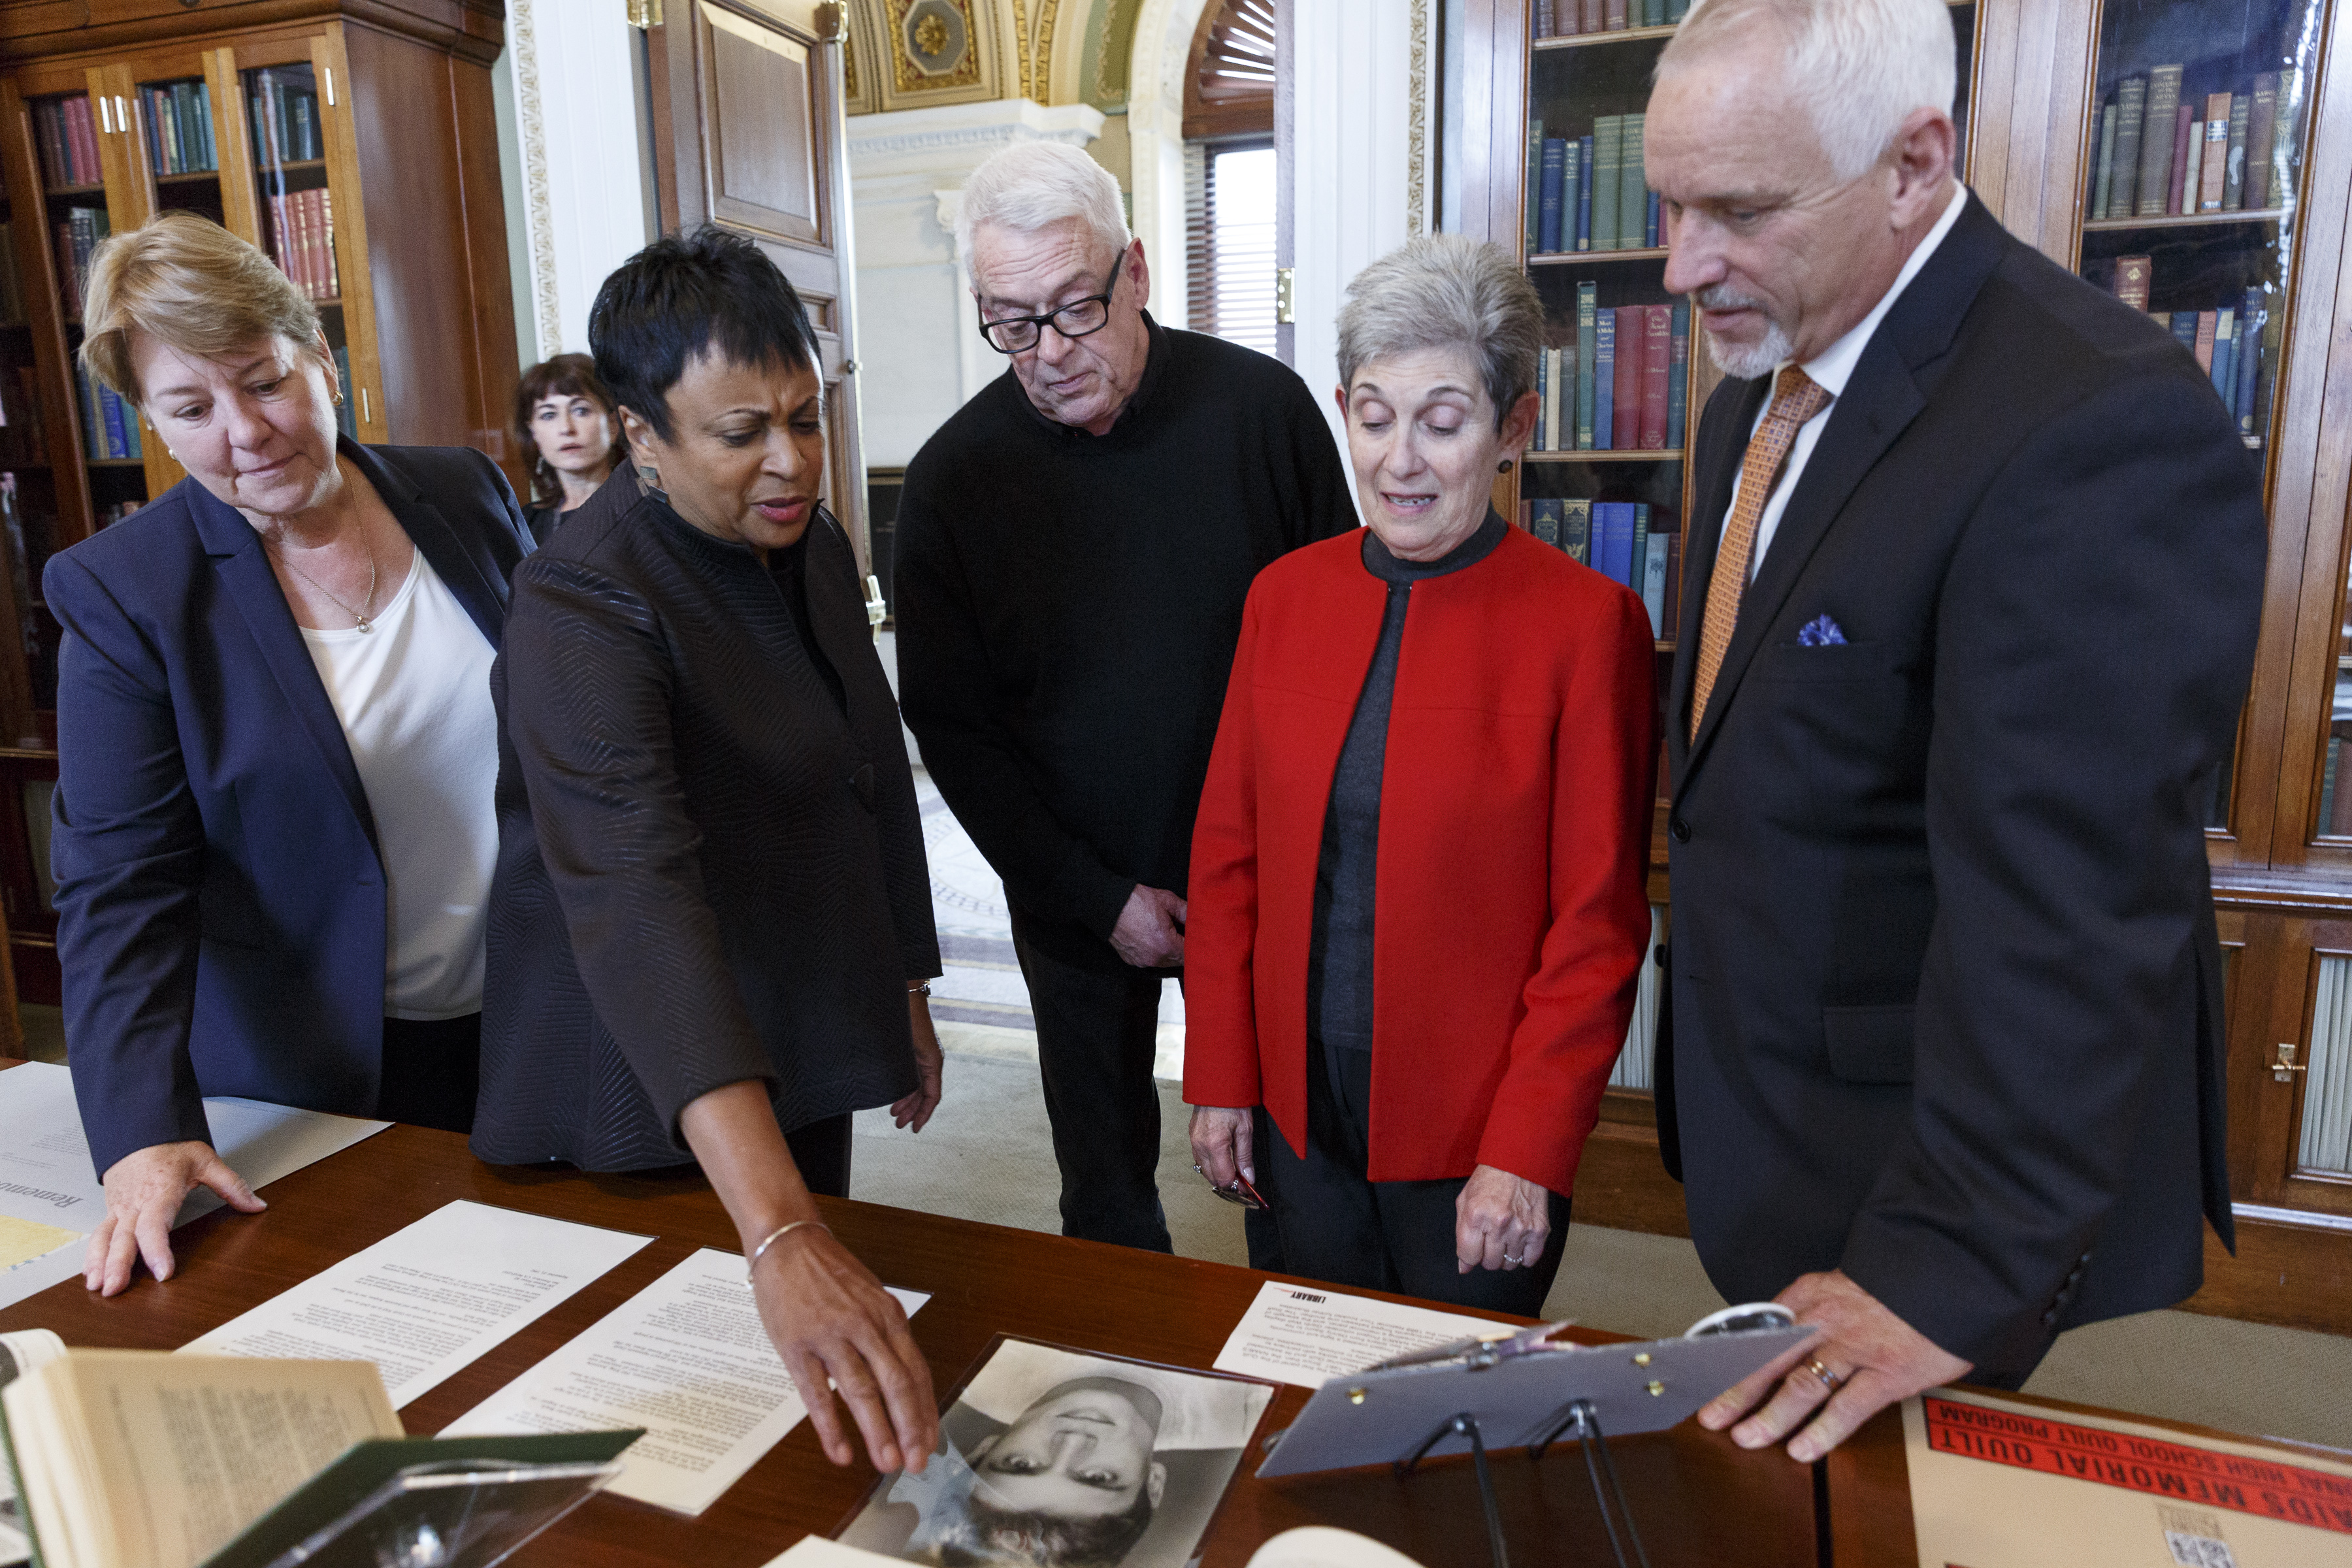 L to R: Julie Rhoad, The NAMES Project Foundation; Librarian of Congress Carla Hayden; Cleve Jones, The AIDS Quilt founder; Tina Crosby, sister of Marvin Feldman, whom the first panel was made to honor; John Cunningham, National AIDS Memorial look at a photo of Marvin Feldman as part of the archival collections that will now reside at the Library of Congress as part of an announcement today that also will move the more than 50,000 panels of The AIDS Quilt back to San Francisco where it was started 32 years ago.  Photo Credit: Shawn Miller, Library of Congress